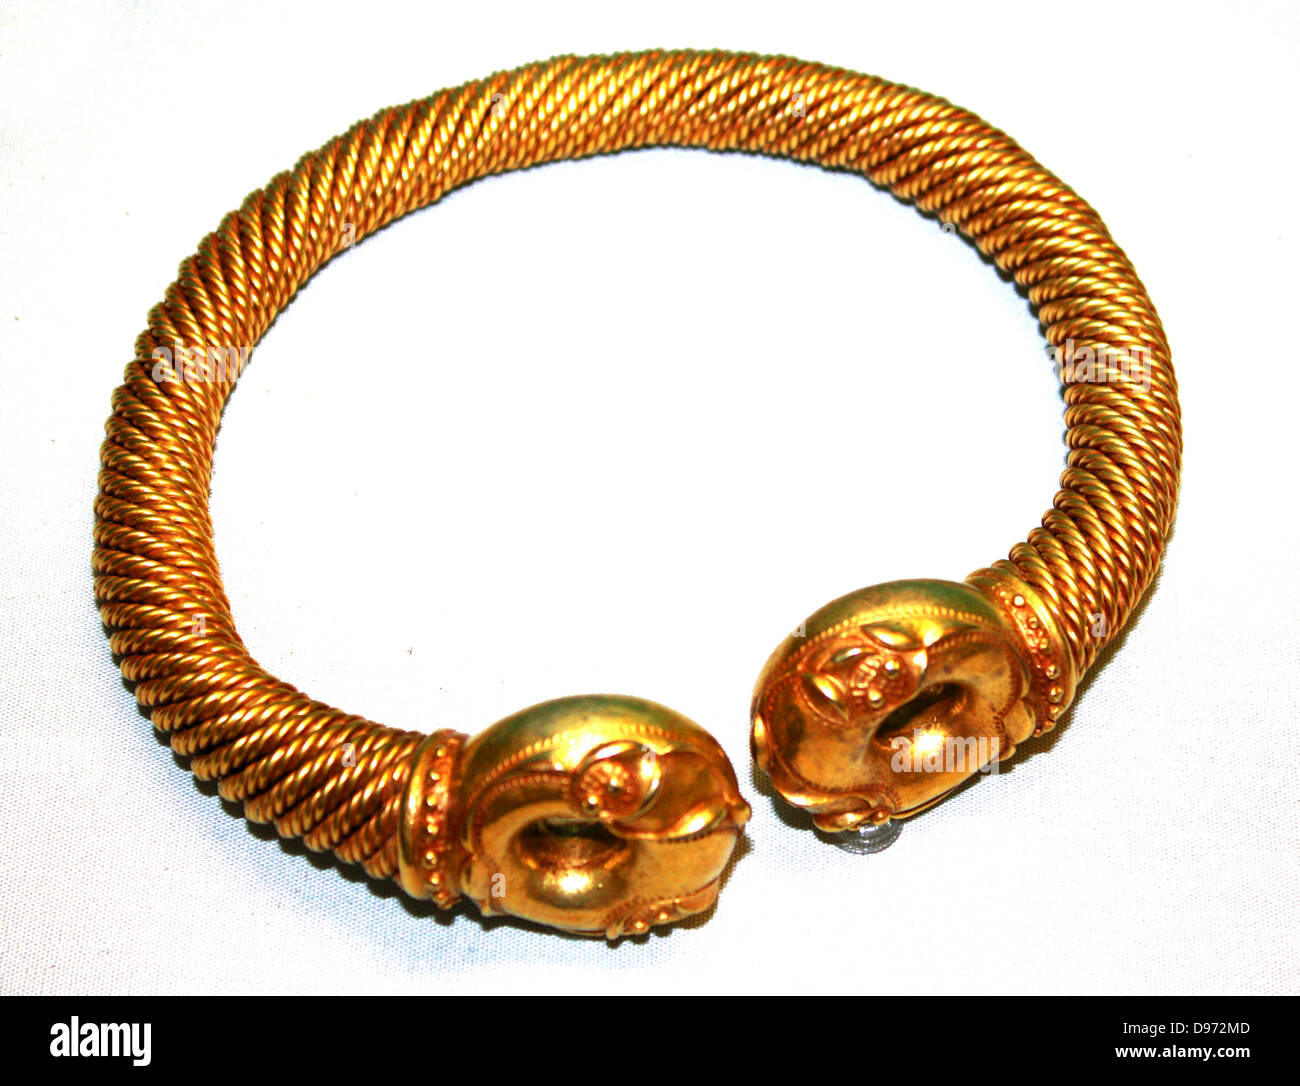 Gold and silver-alloy tore. Near Newark, Nottinghamshire. About 100-50 BC. This tore was discovered by a metal detectors' 2005. It is thought that it was deliberately placed in a specially dug hole, perhaps as an offering to the gods. Torcs were worn around the neck and were probably worn on a special occasions like a mayoral chain. Stock Photo